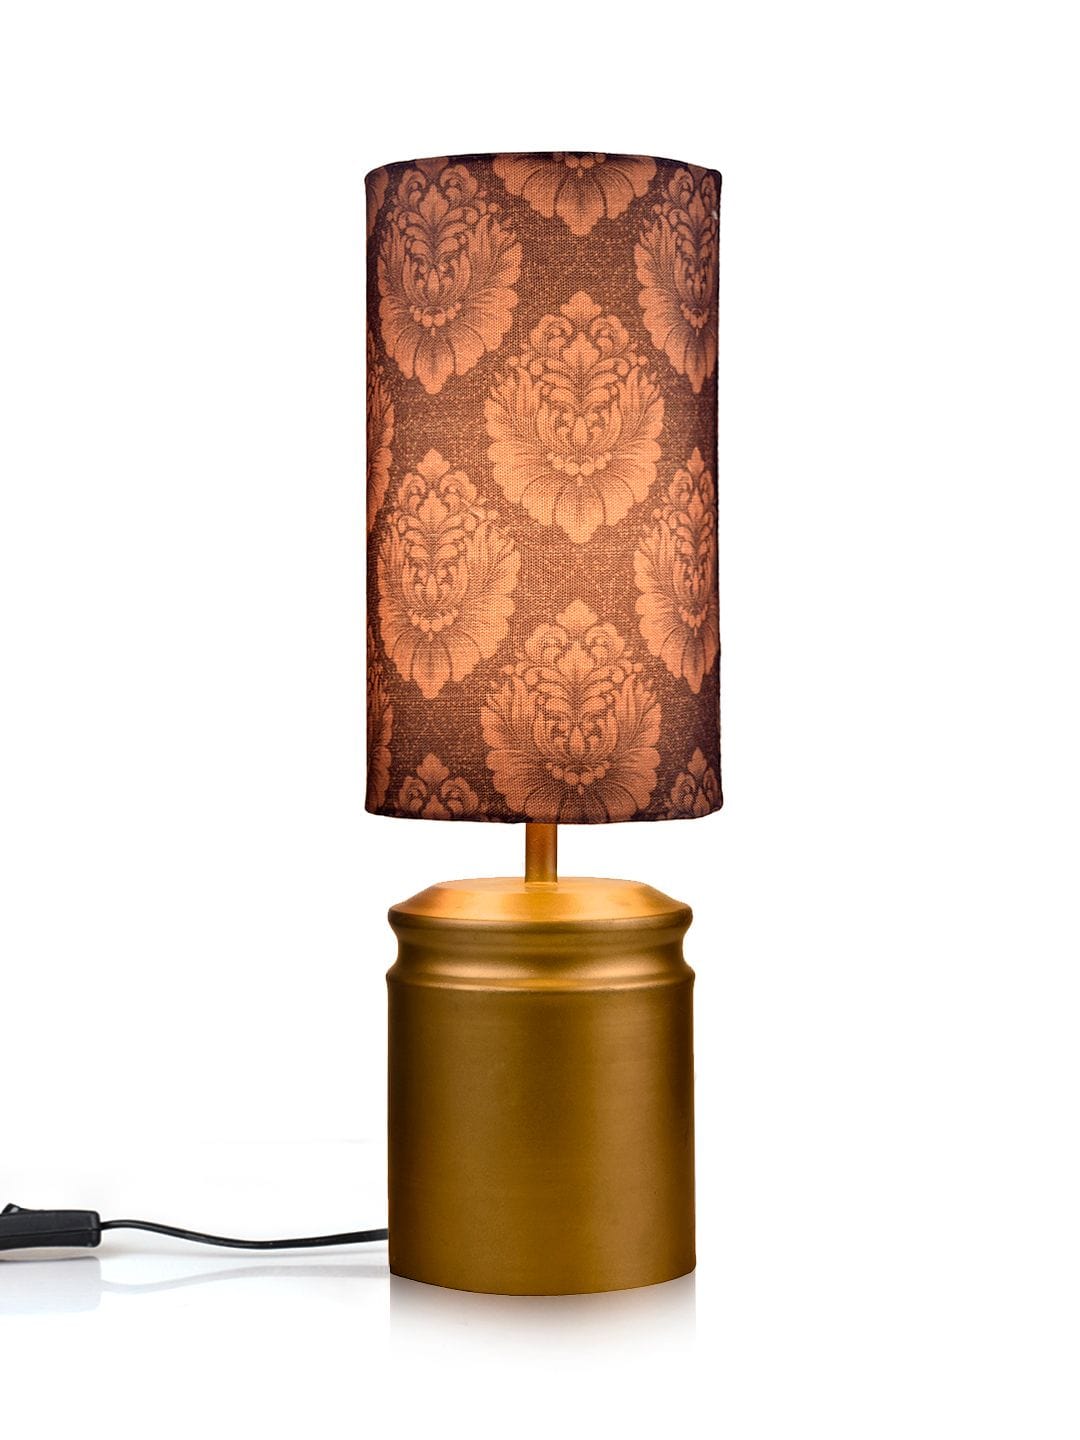 Metal Golden Table Lamp with Motives Printed Shade